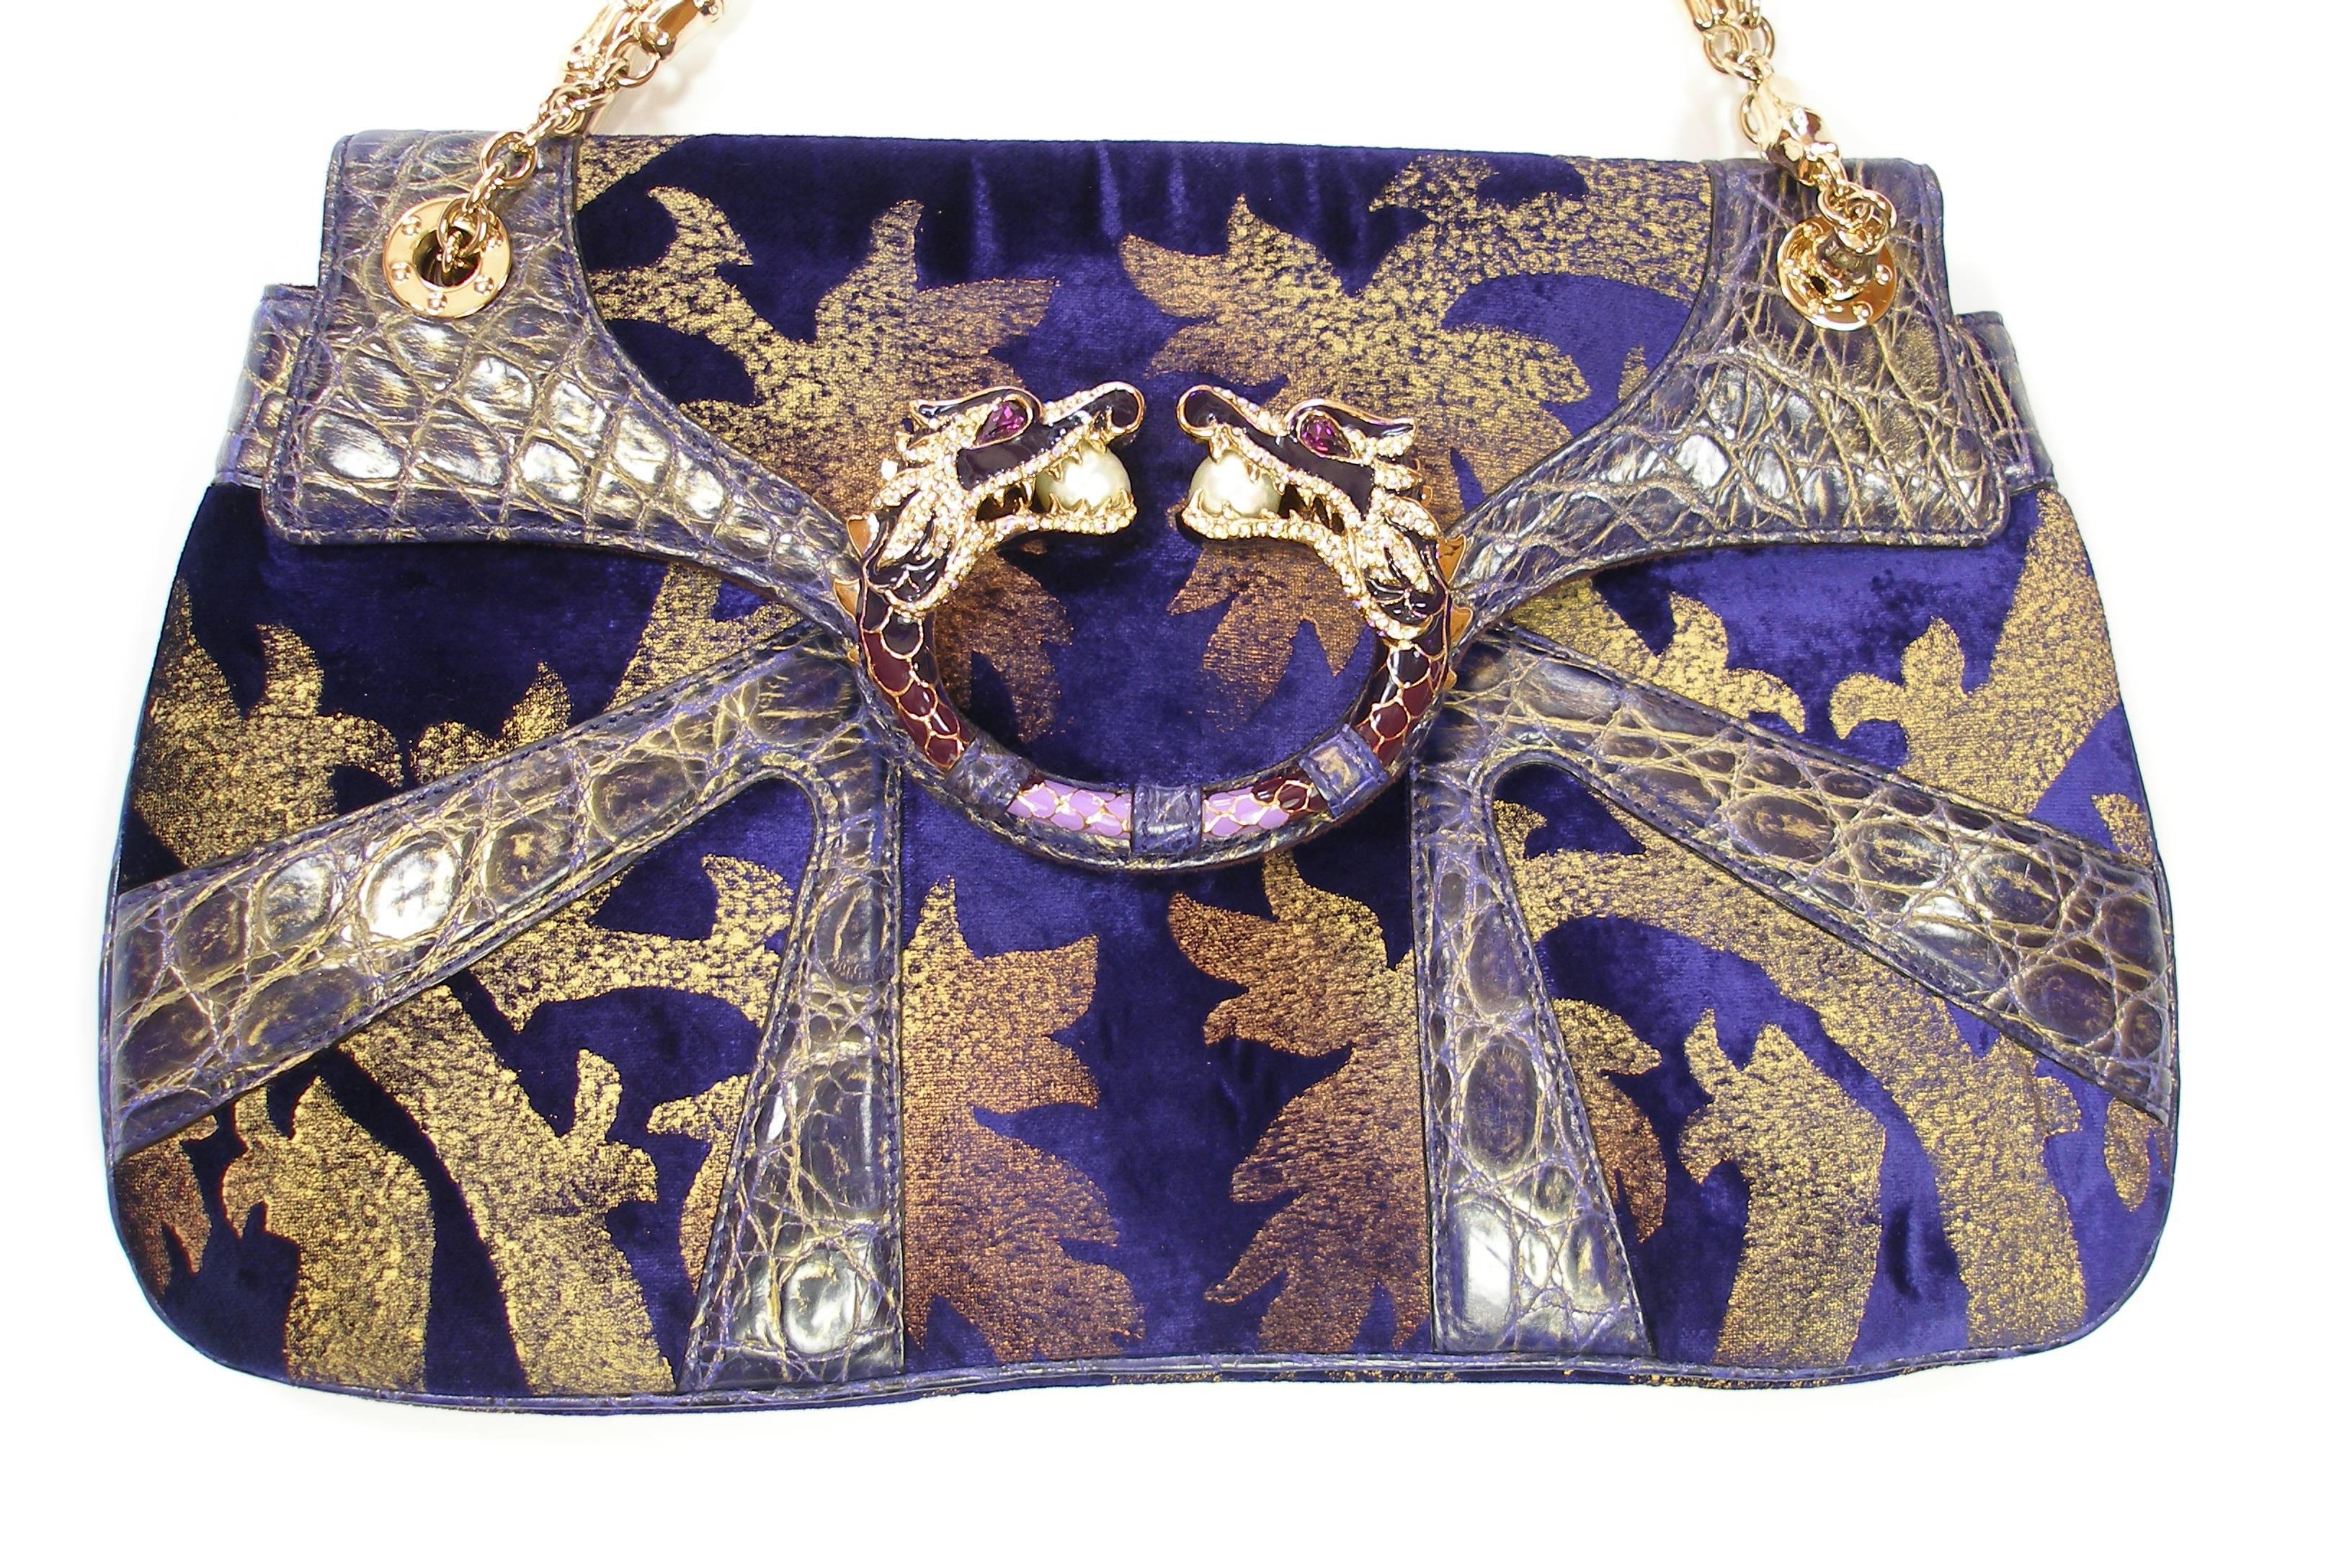 Iconic Tom Ford Gucci FW 2004 Leather Velvet Crystal Runway Dragon Bag
Dragon Bag , Tom Ford's incredible runway collections for Gucci 
Collection year 2004 !
Alligator print leather , silk velvet  Dragon Bag with swarovski crystal détail